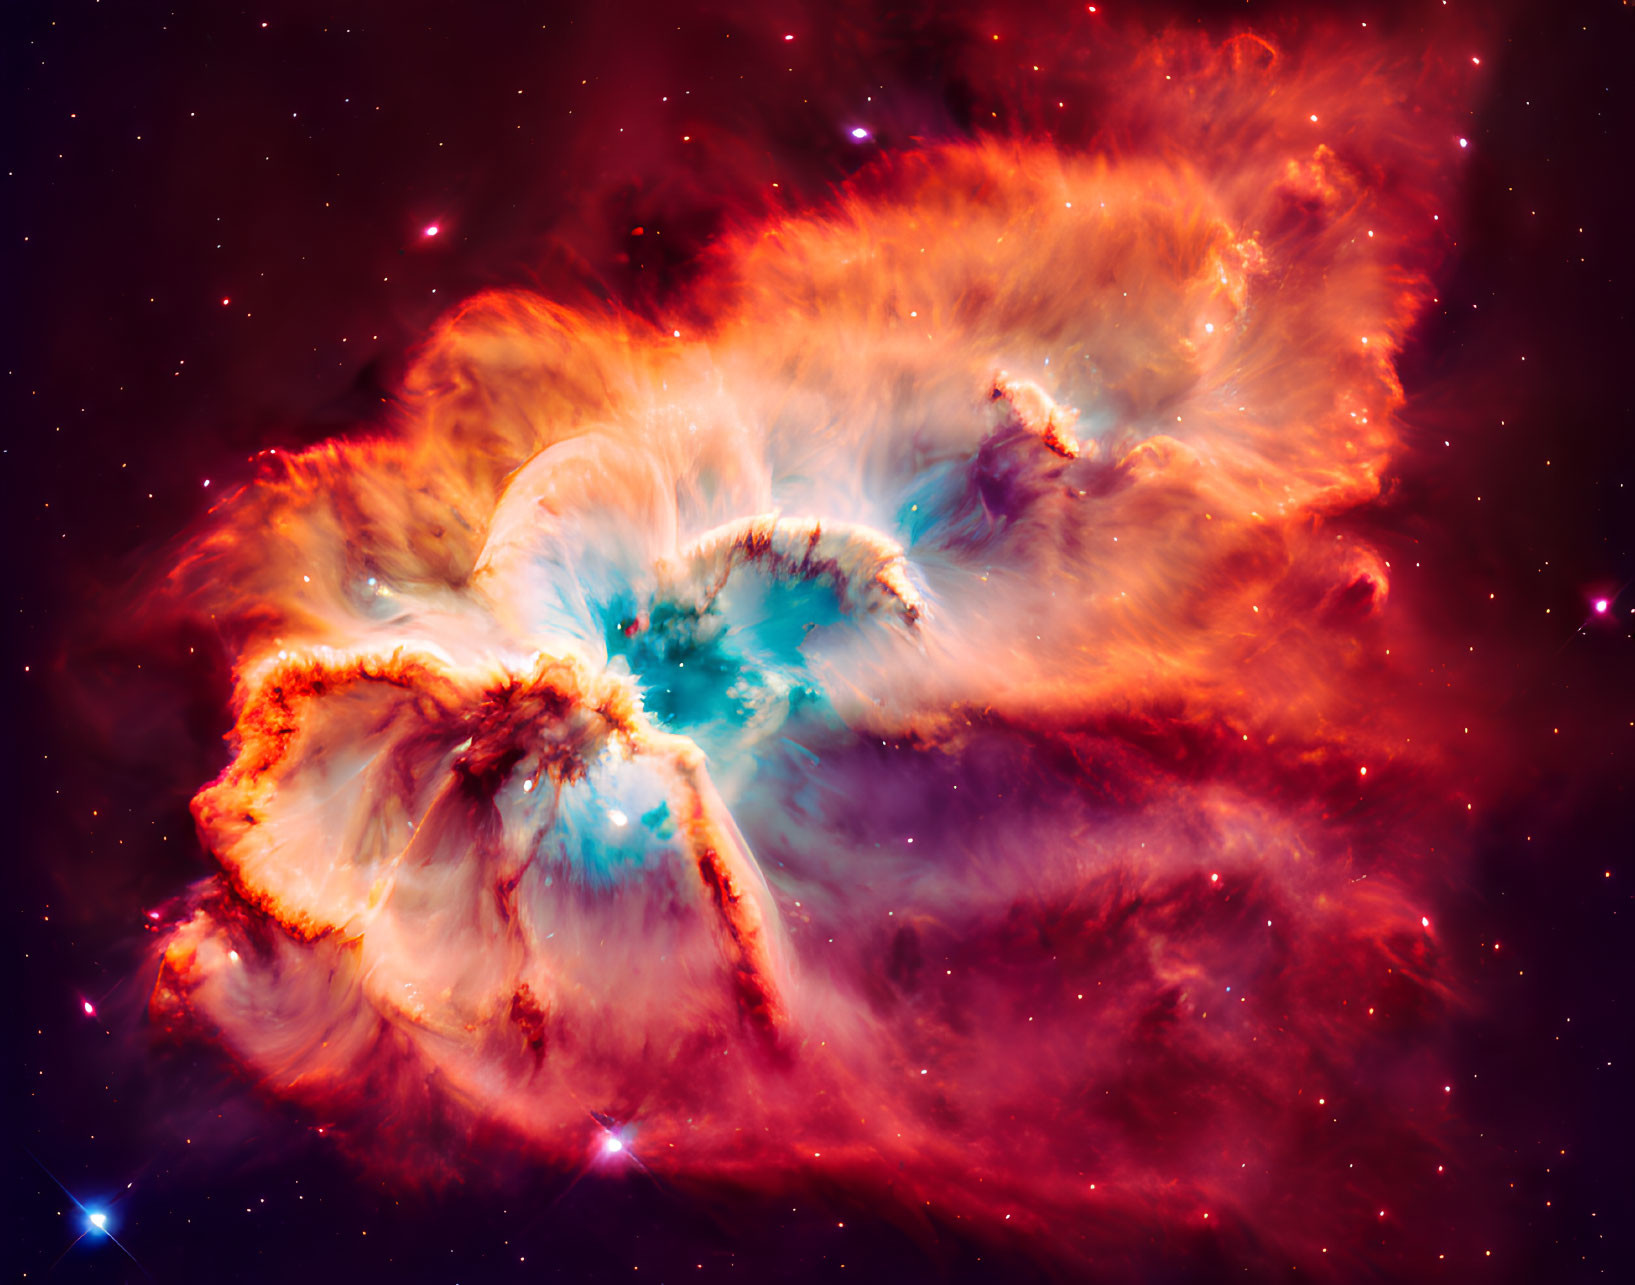 Colorful Swirling Nebula with Red, Orange, and Blue Hues